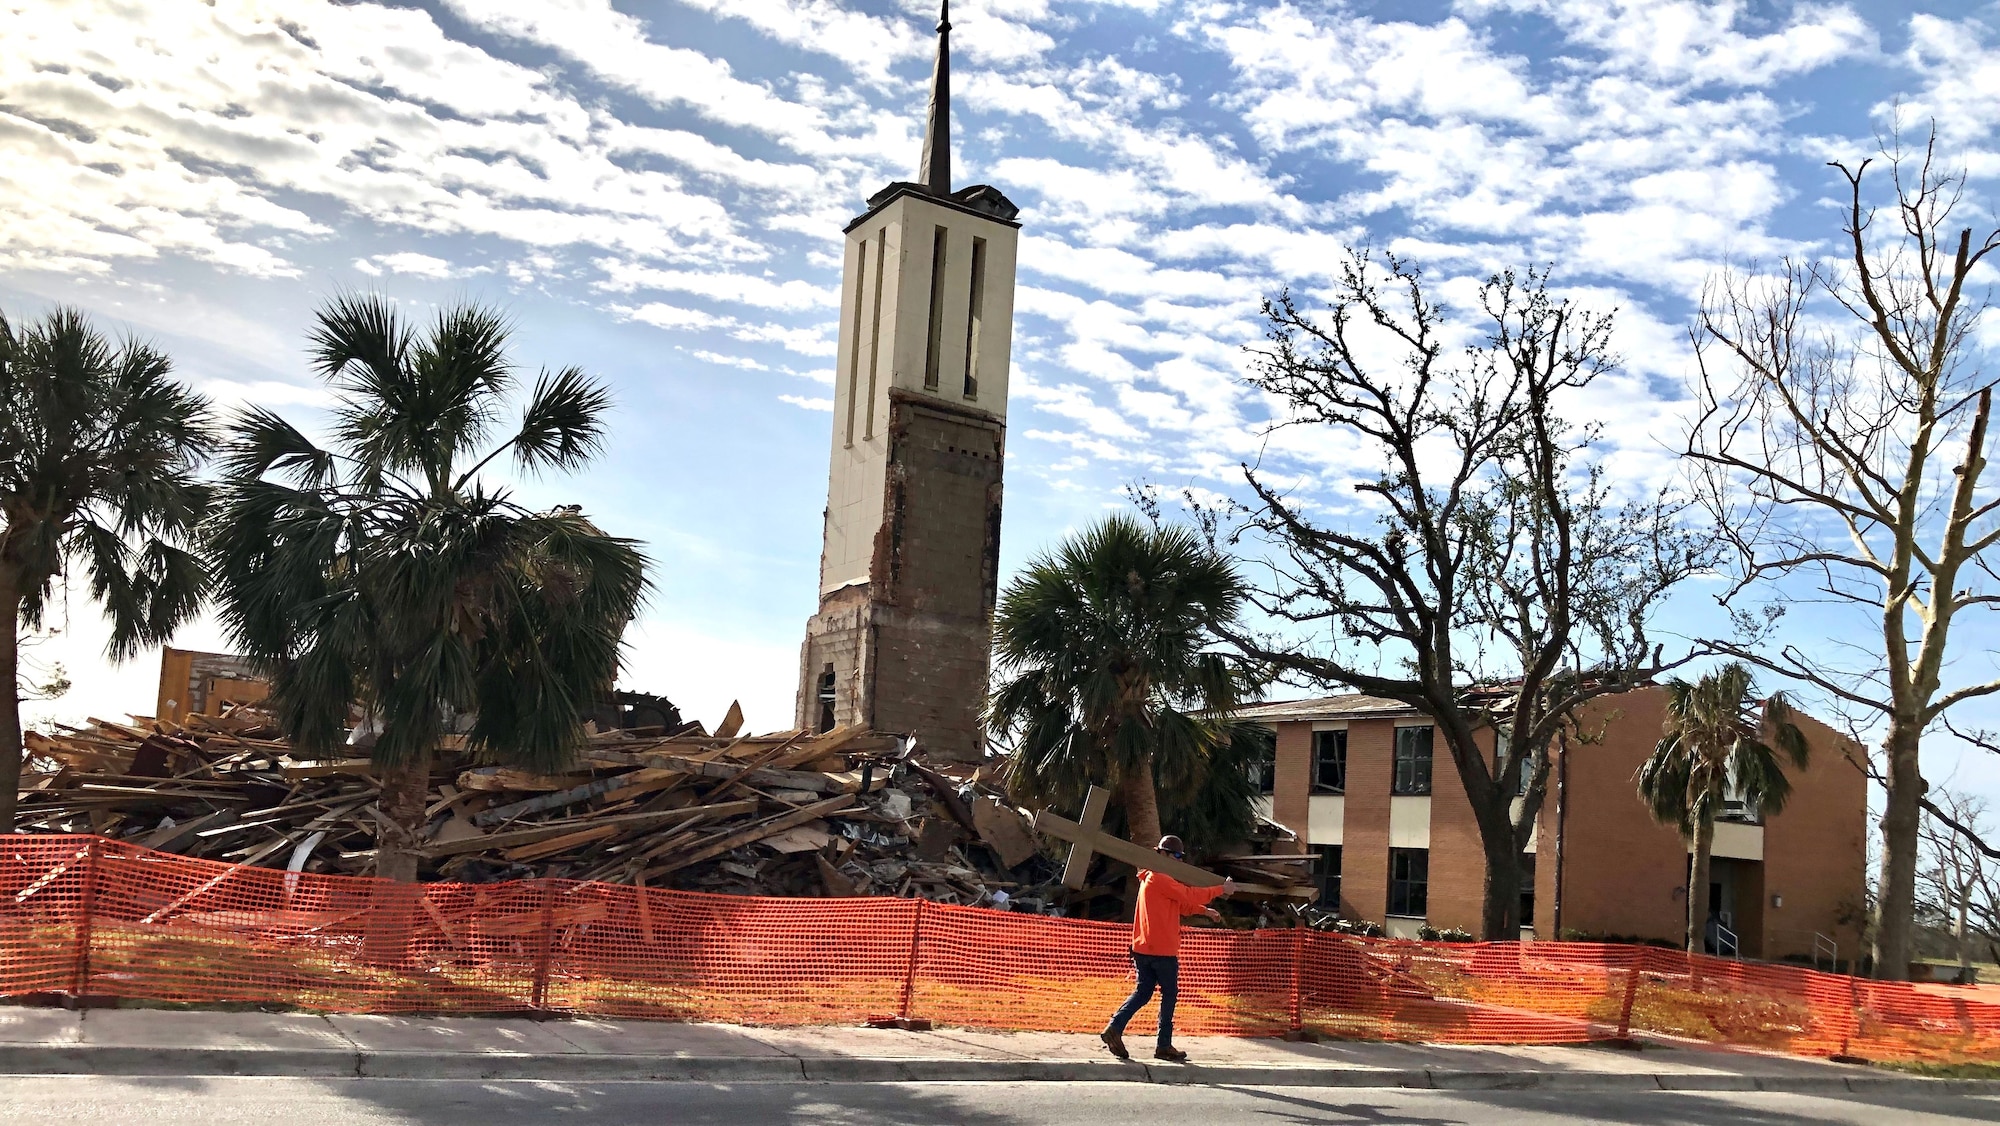 A construction worker carries a cross after an excavator demolished the Tyndall Air Force Base, Florida, chapel in February. The Tyndall Chapel was unable to be restored after sustaining immense damage from Hurricane Michael on Oct. 10, 2018. (U.S. Air Force photo)